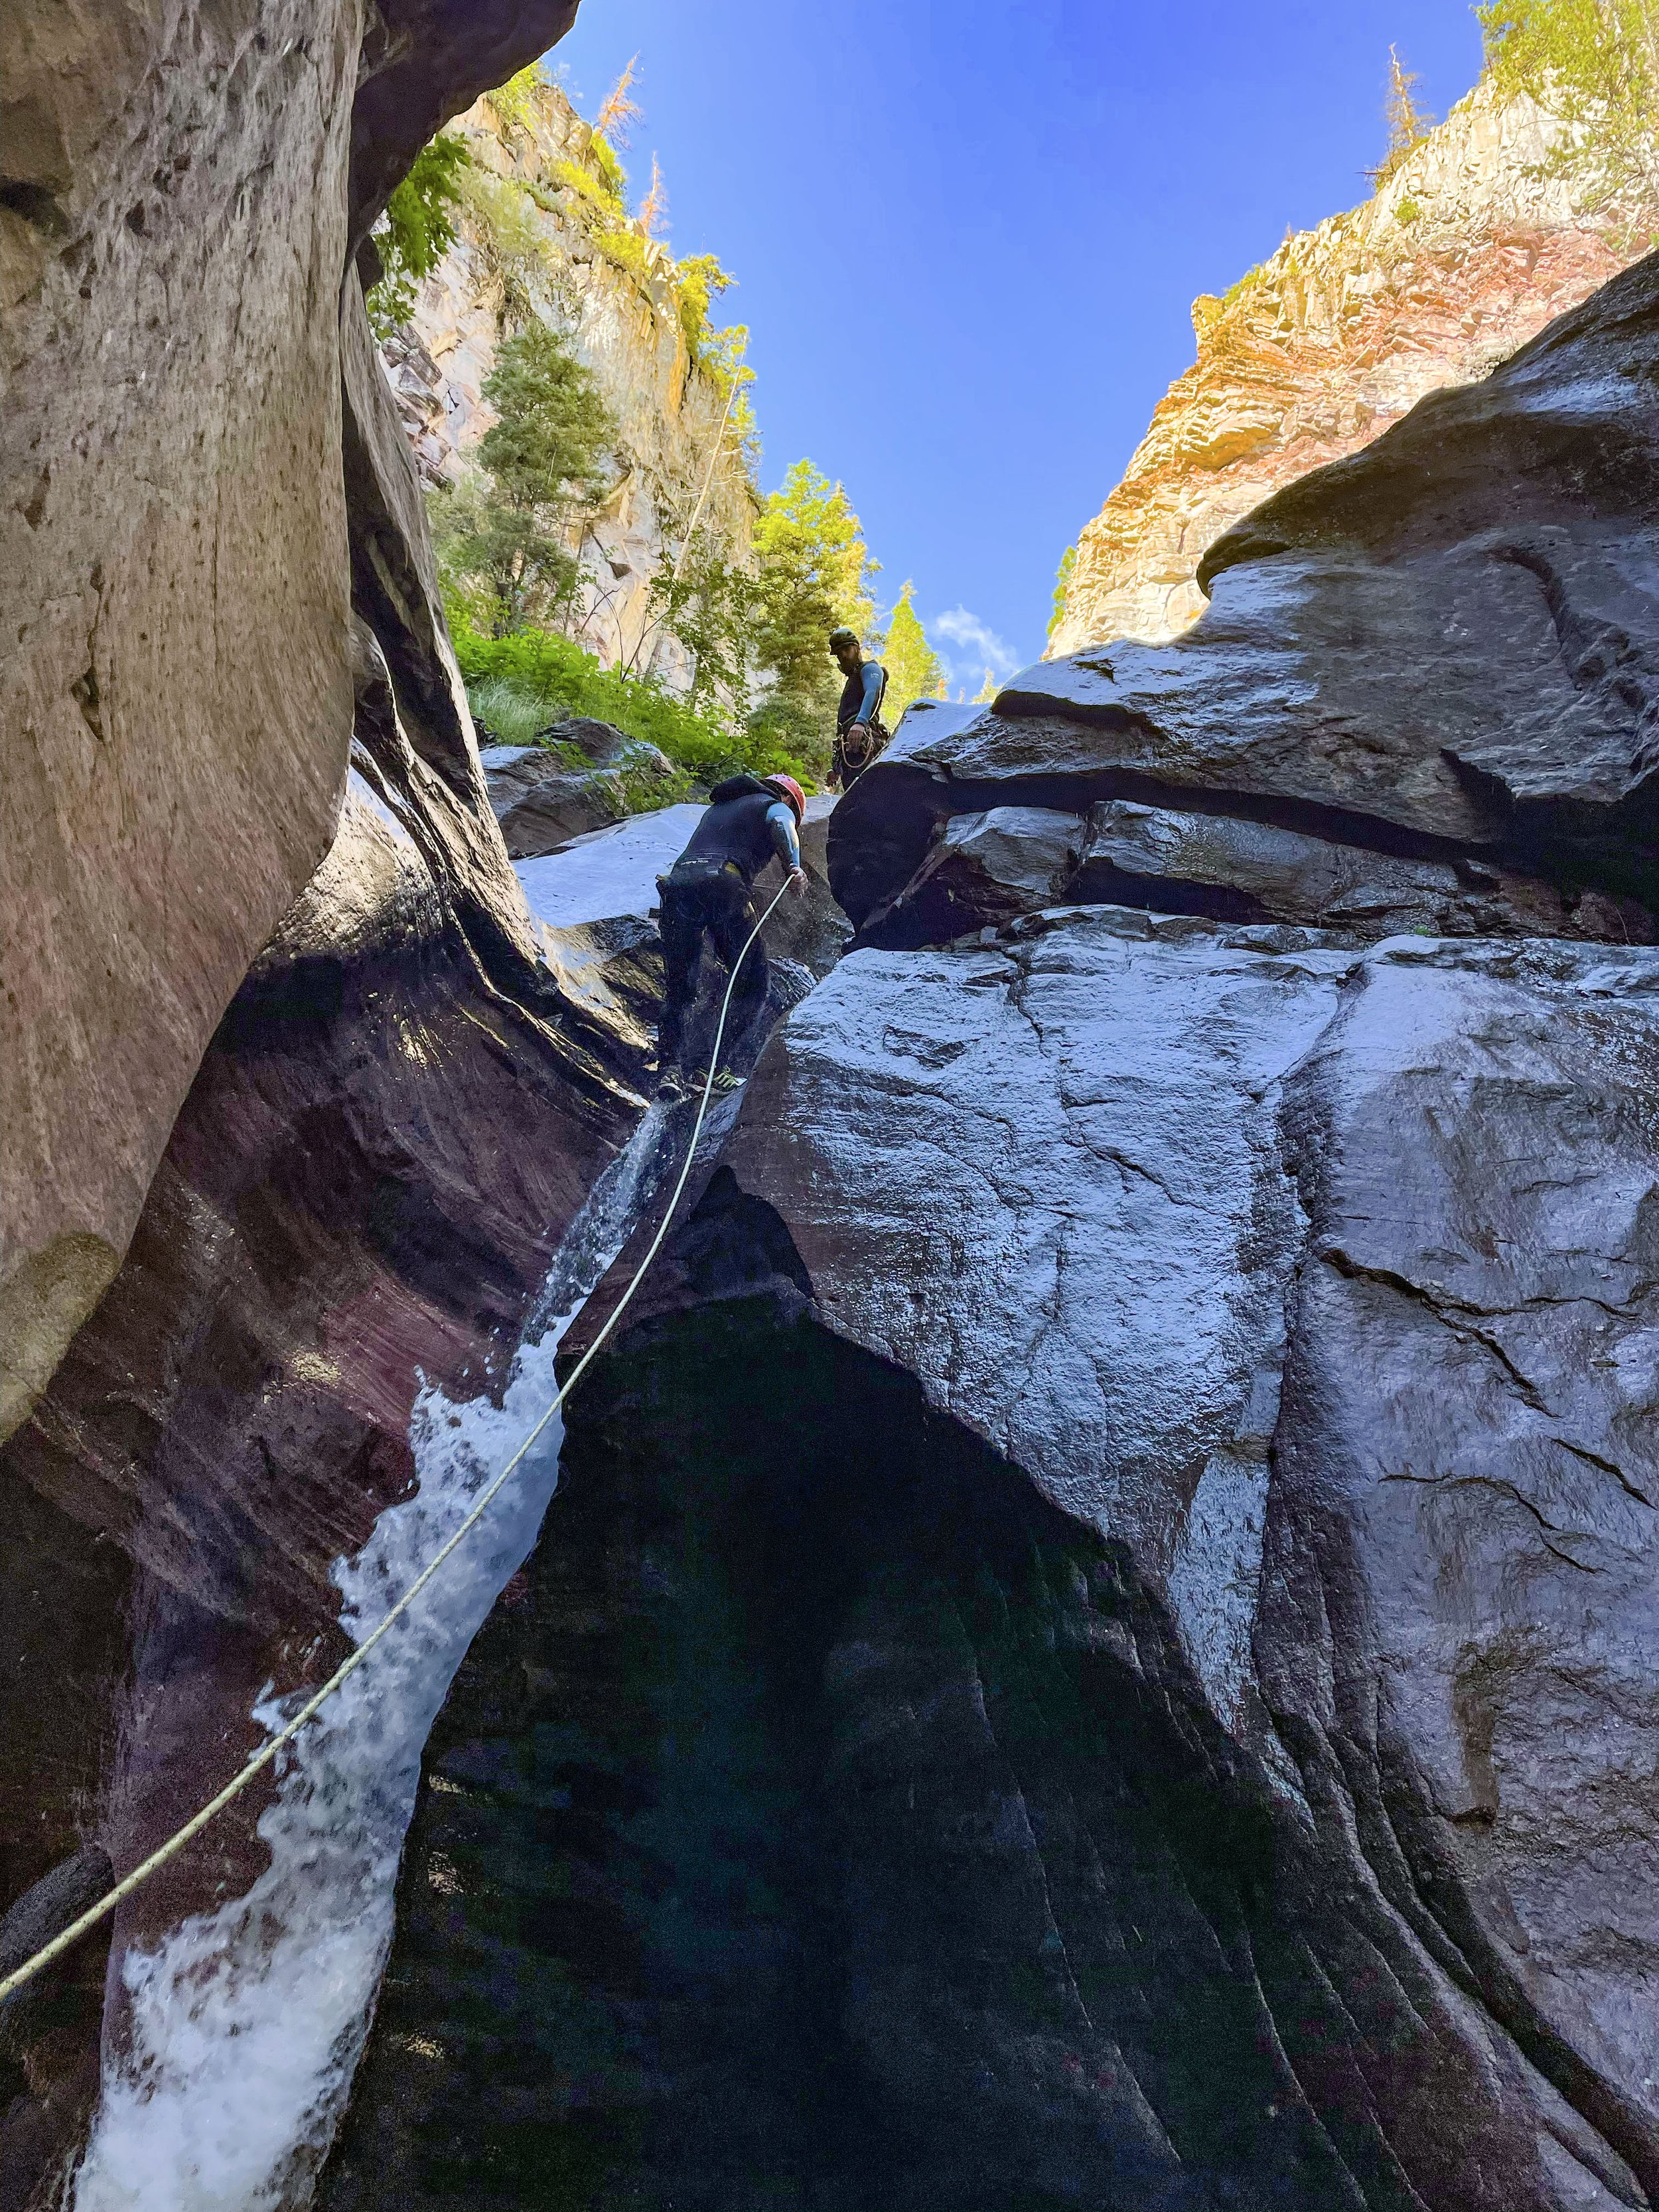 Repelling down slot canyon